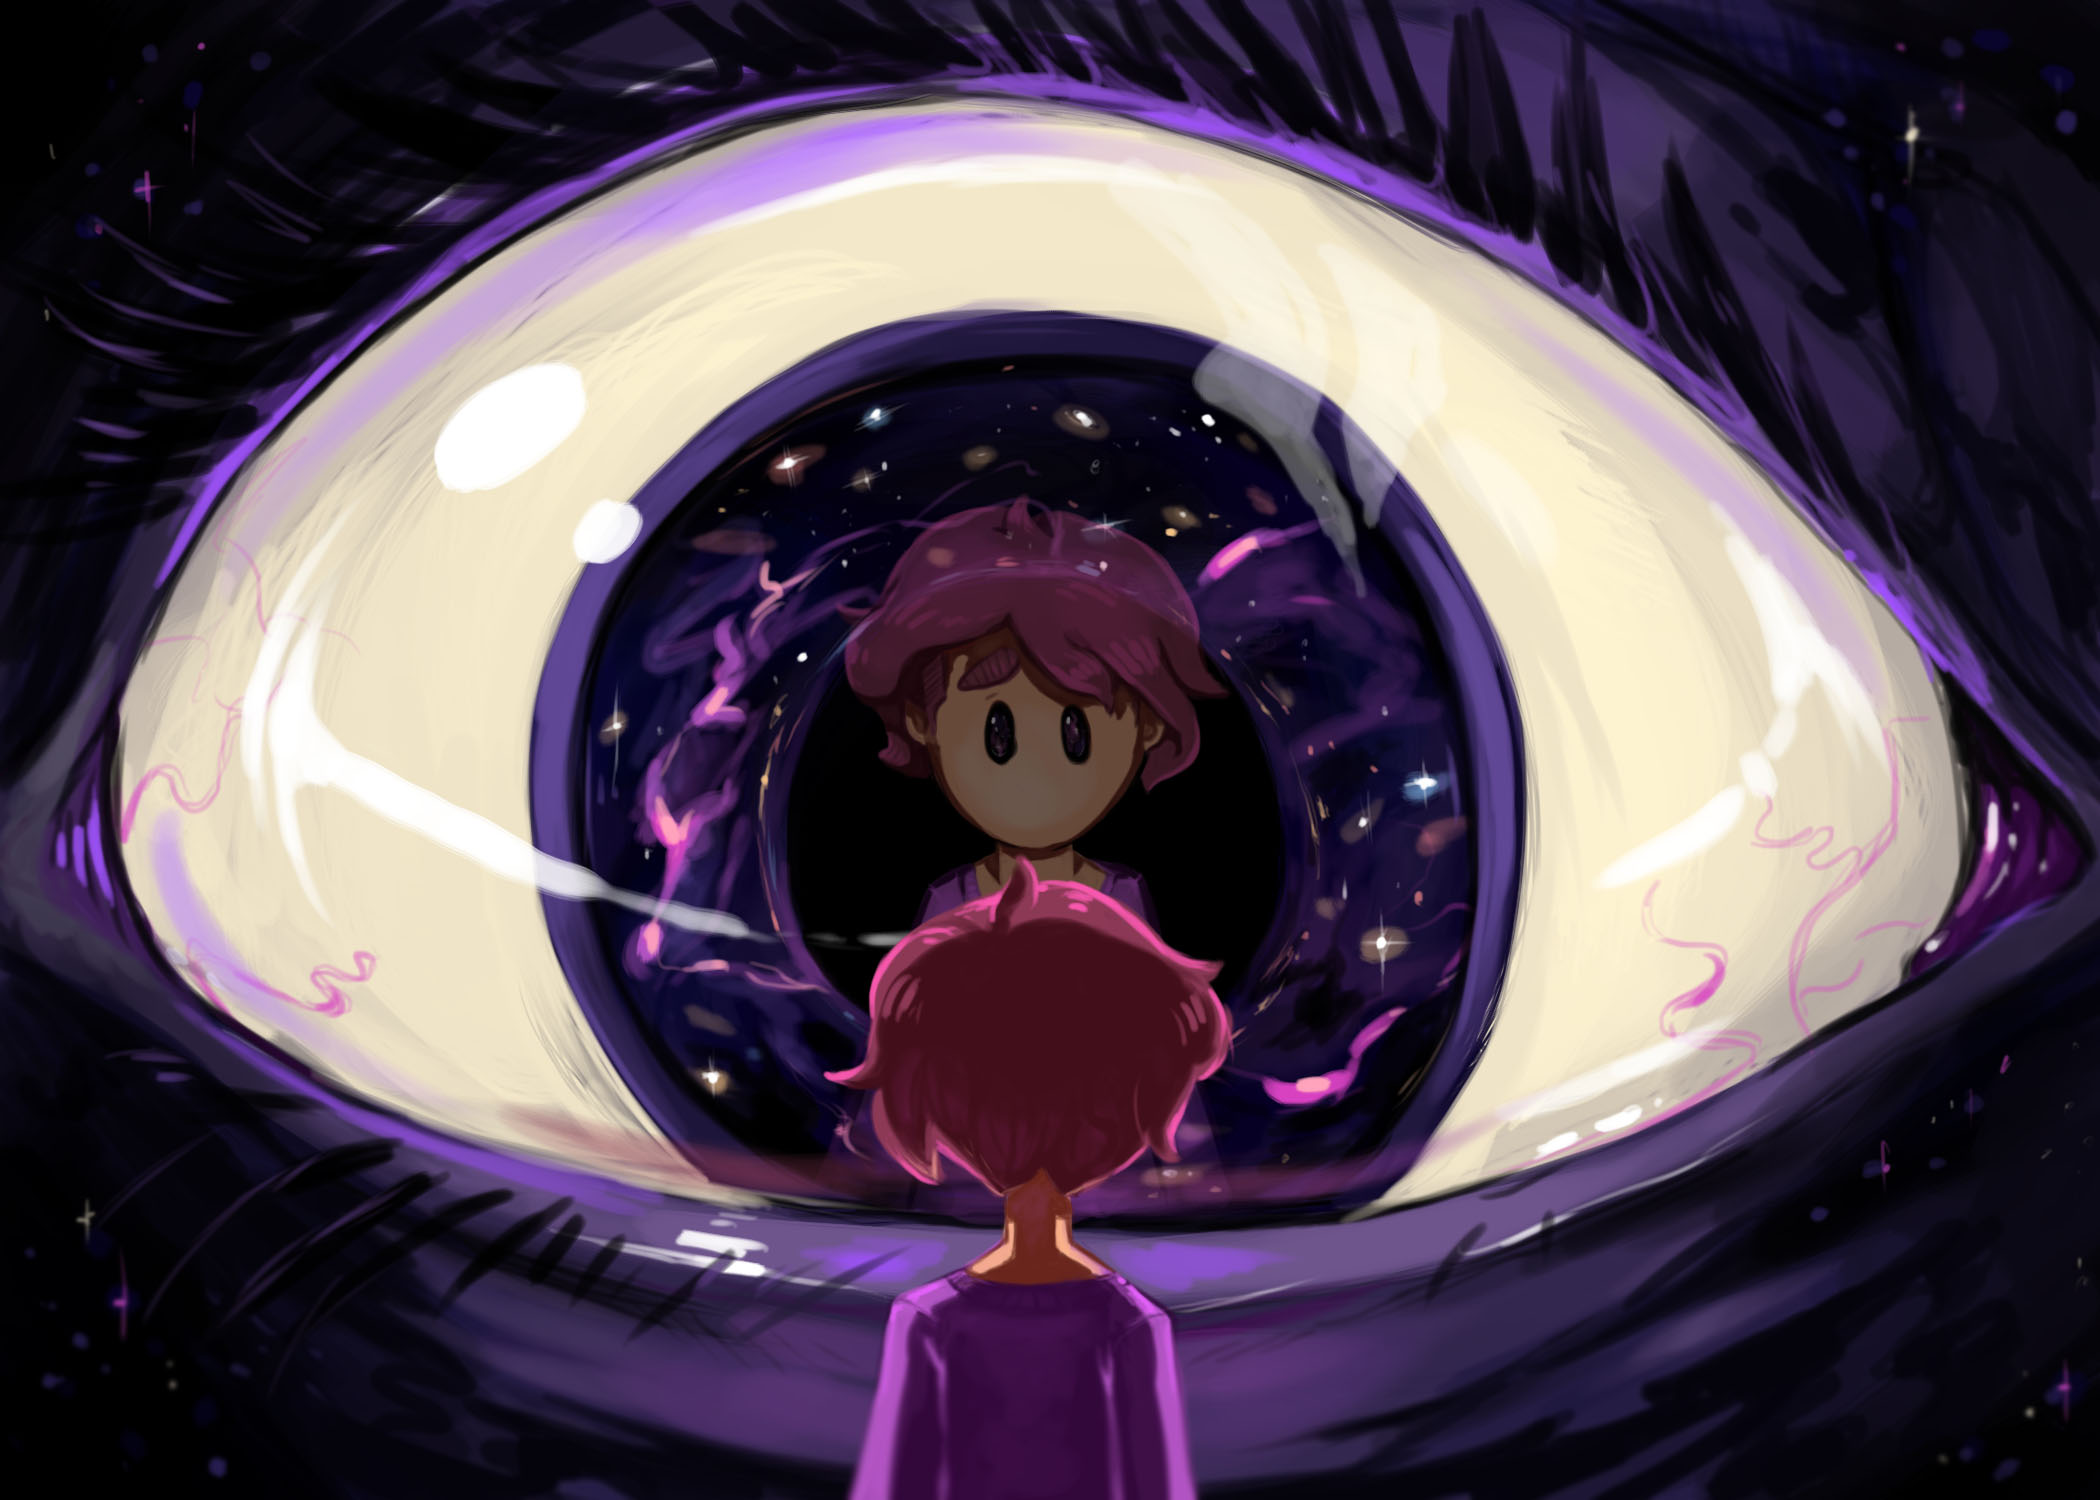 stare-into-the-abyss-by-gtpanda-on-deviantart